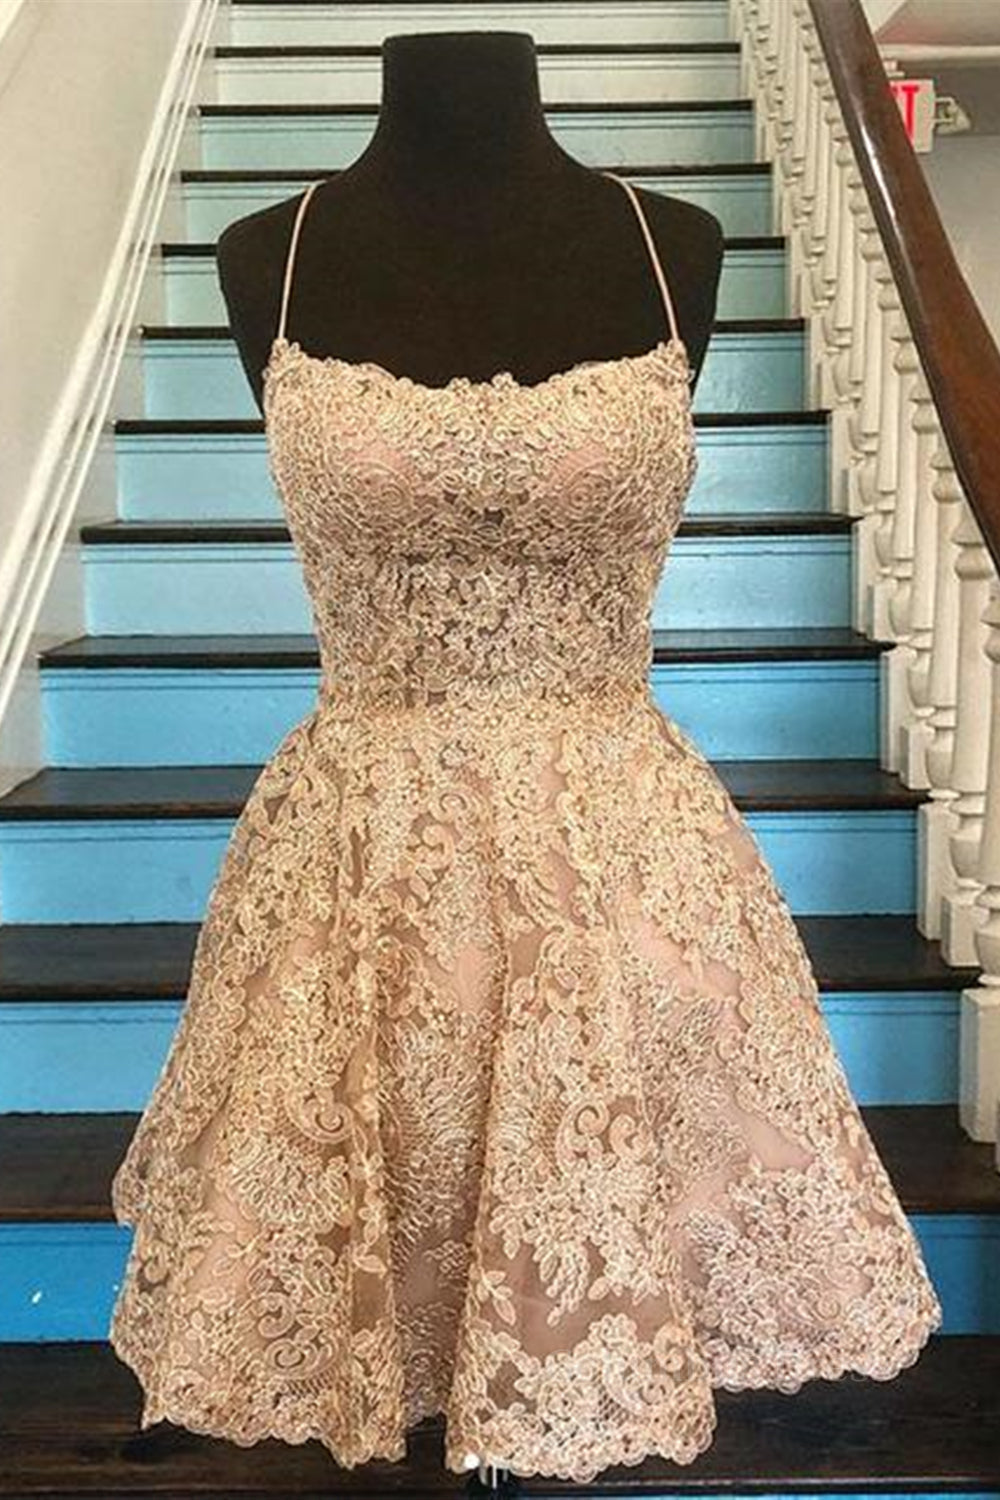 Cute Backless Short Golden Lace Corset Prom Dresses, Golden Lace Corset Homecoming Dresses, Short Golden Corset Formal Evening Dresses outfit, Prom Ideas